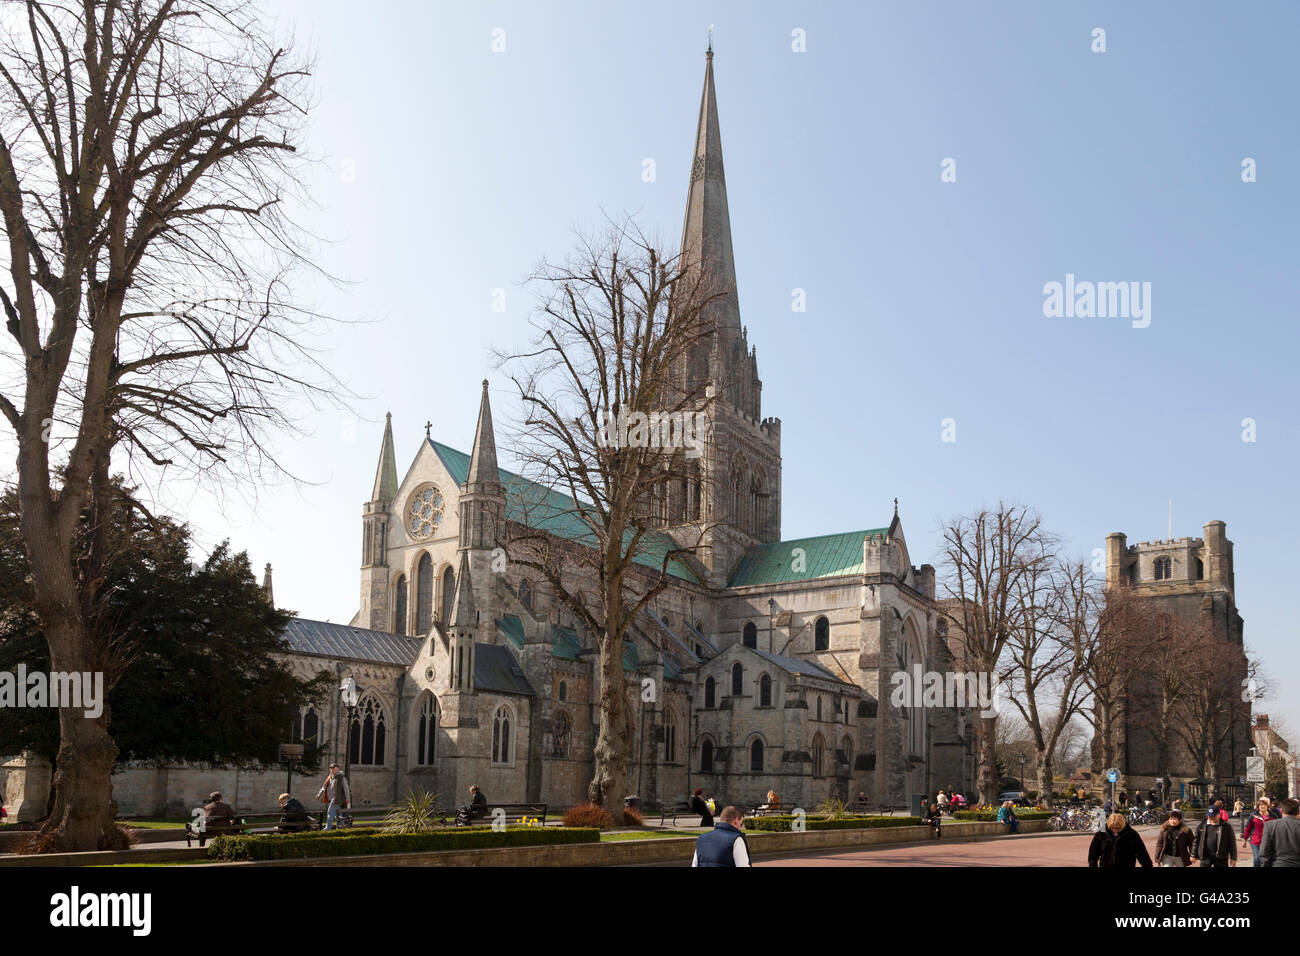 Chichester Cathedral, Chichester, West Sussex, Angleterre, Royaume-Uni, Europe Banque D'Images